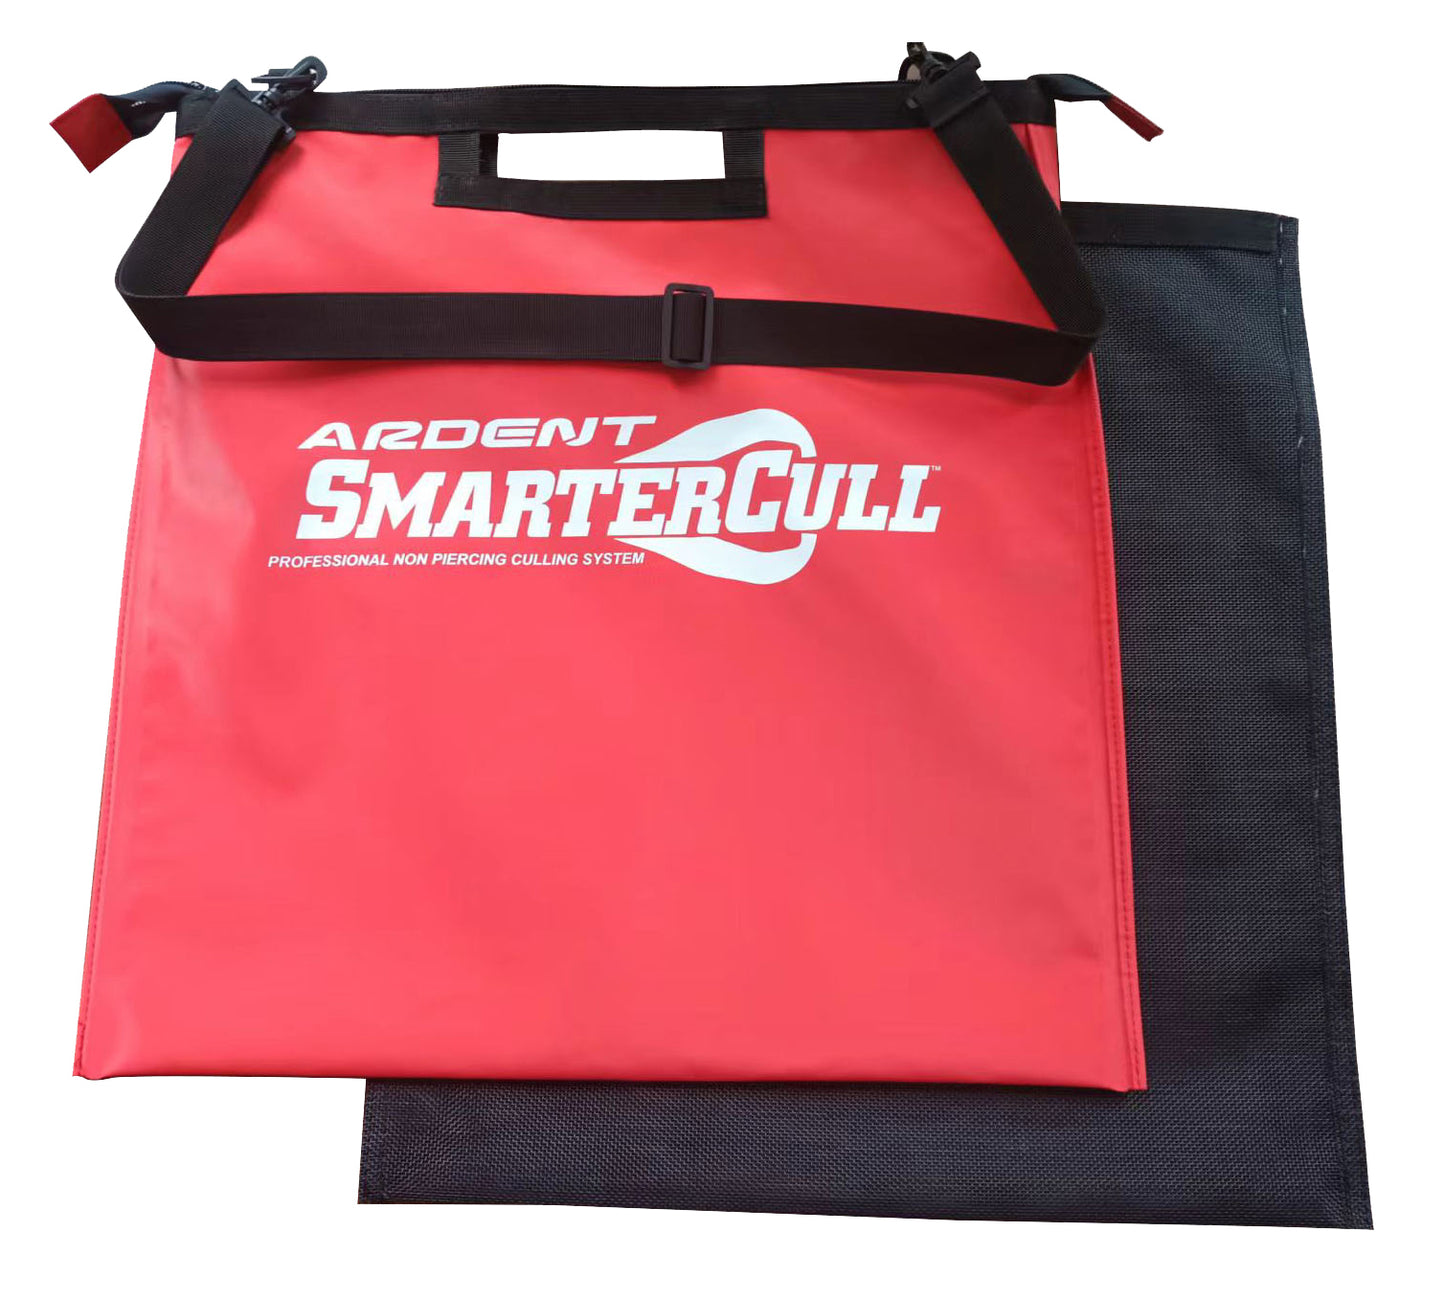 Red PREMIUM WEIGH-IN BAG with white letters. BAG text: ARDENT SMARTERCULL